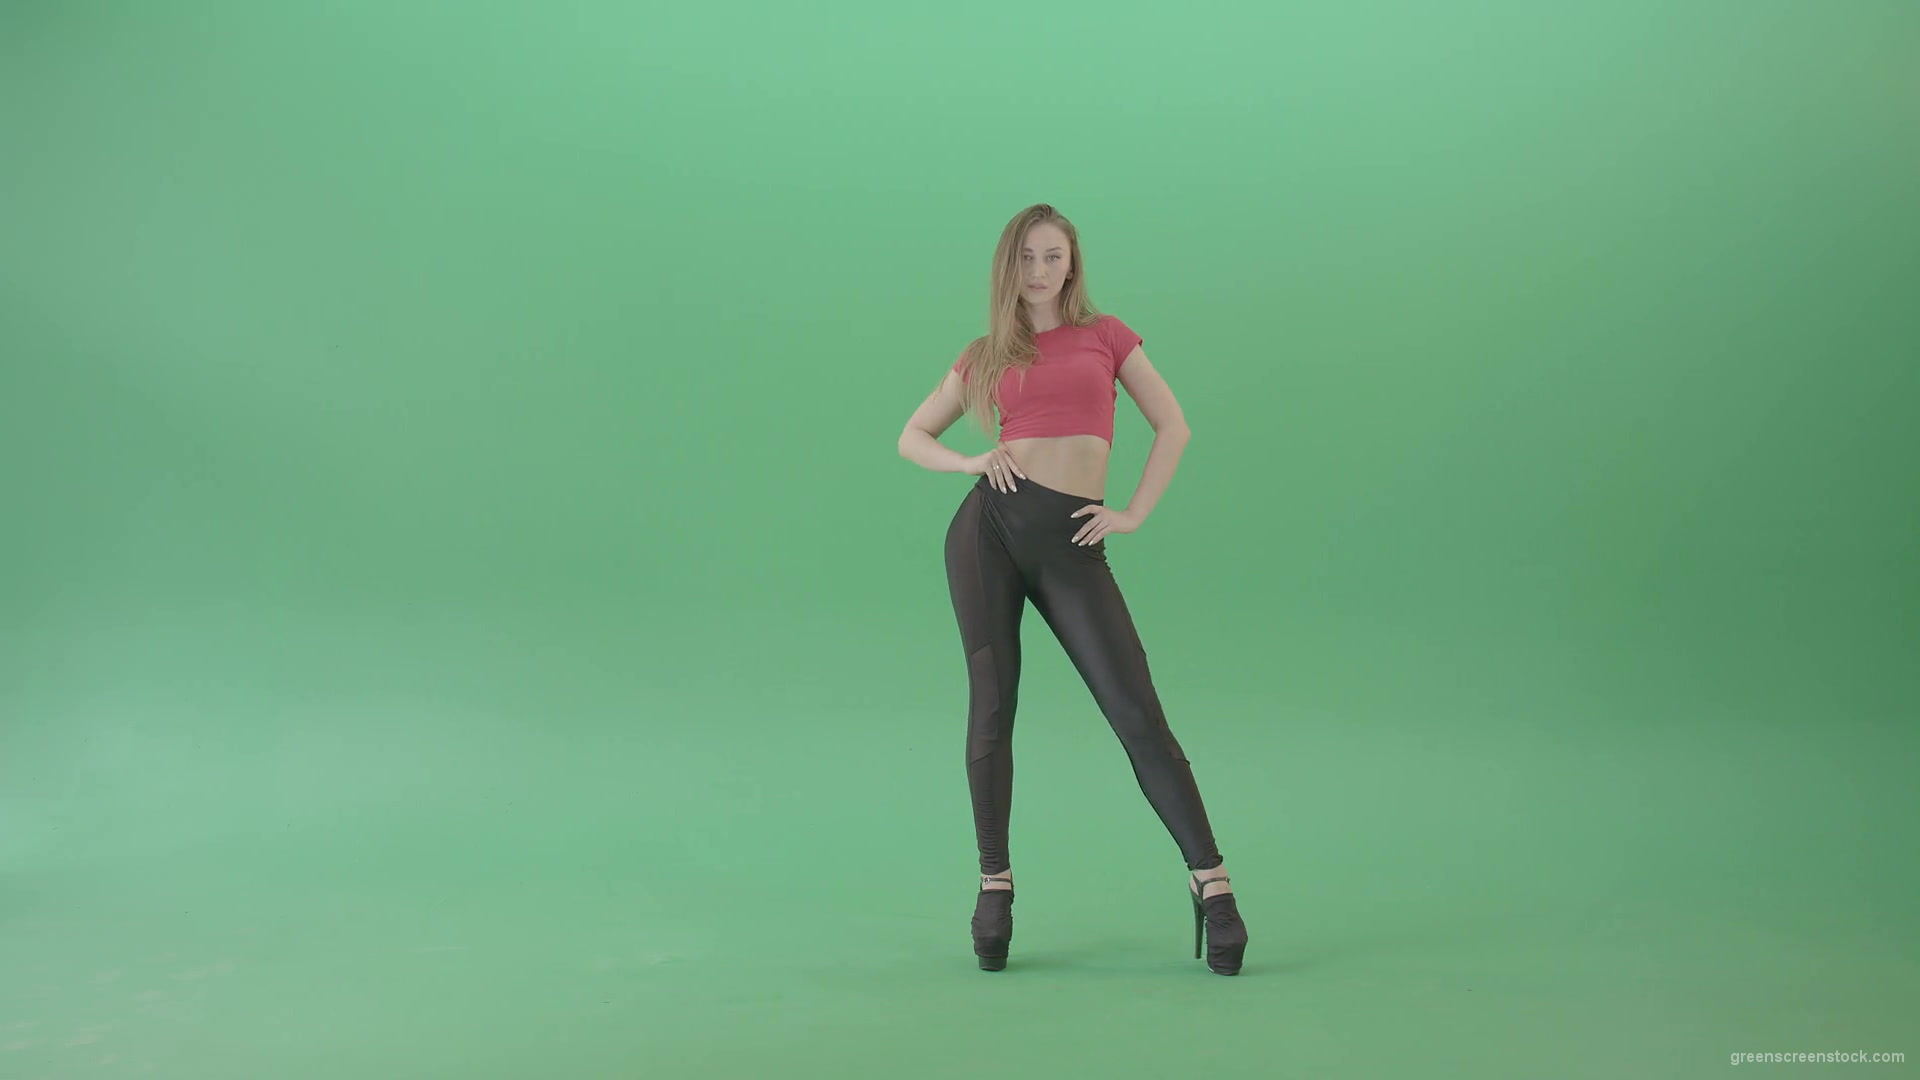 Sexy-Girl-posing-on-green-screen-in-red-t-shirt-4K-Video-Footage-1920_006 Green Screen Stock